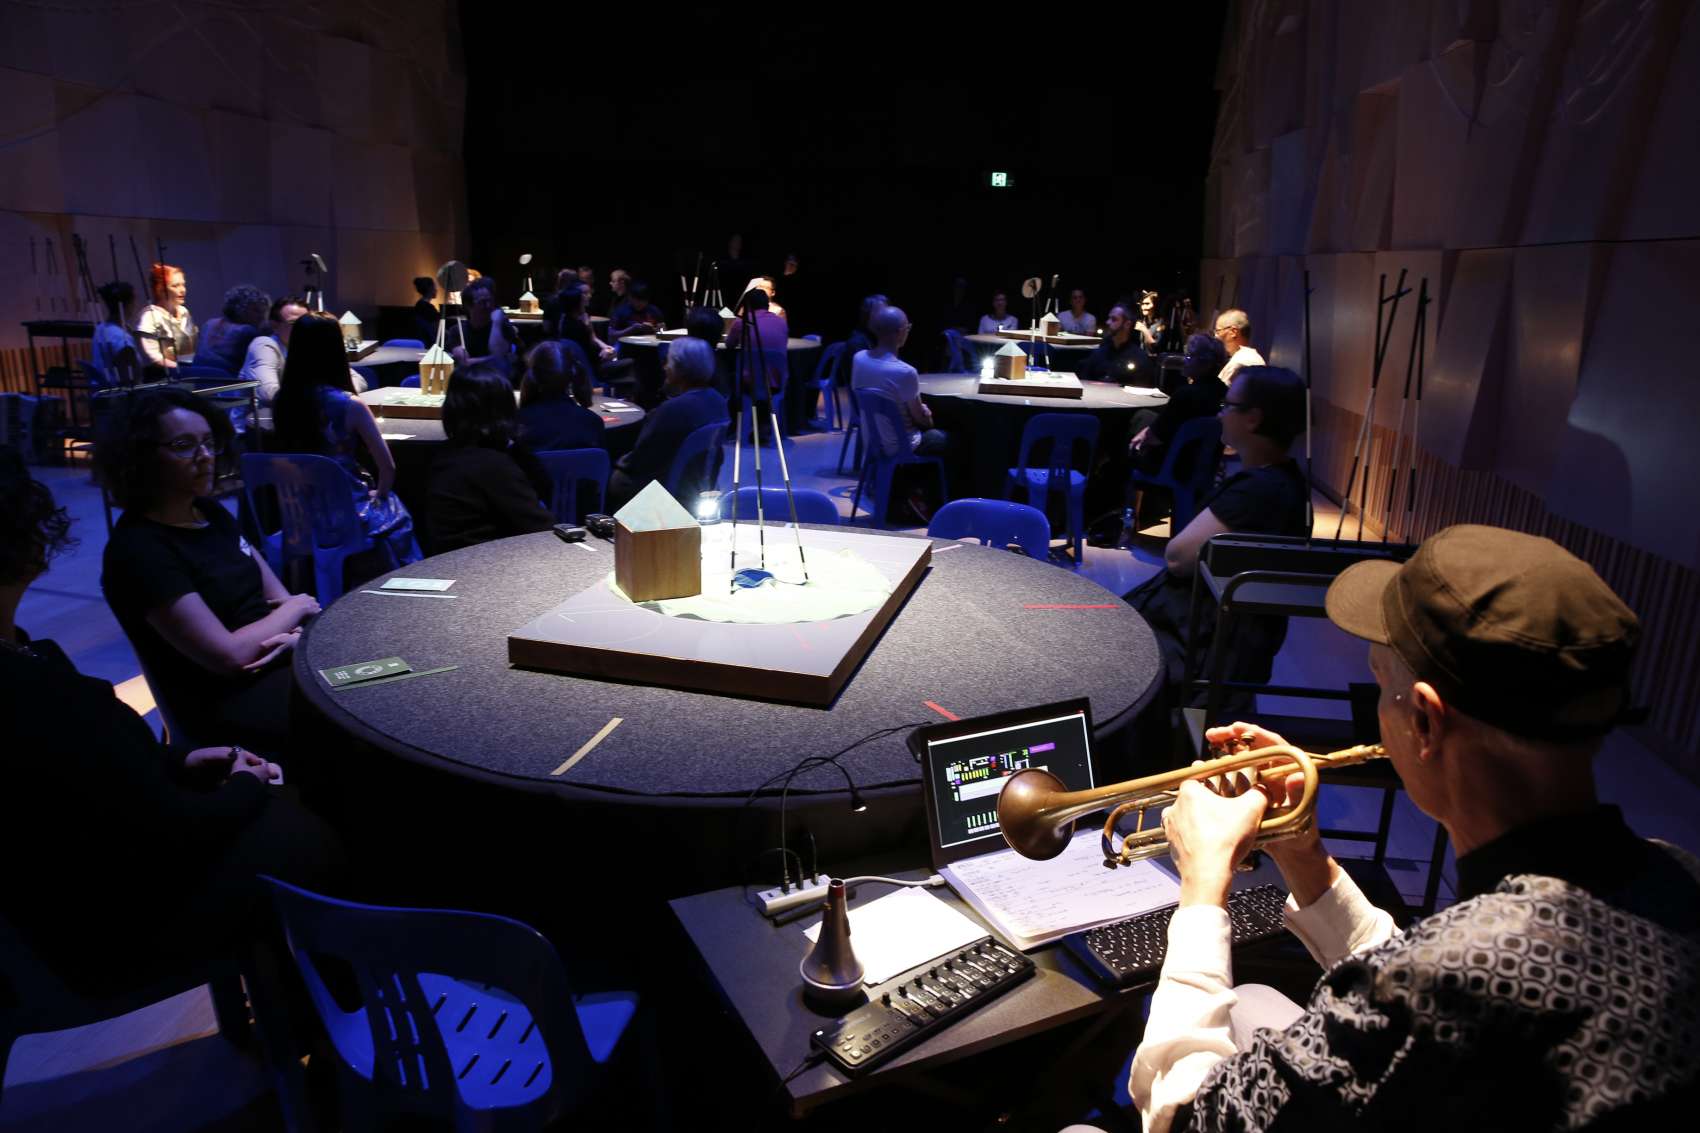 A performance space with audience seated around round tables